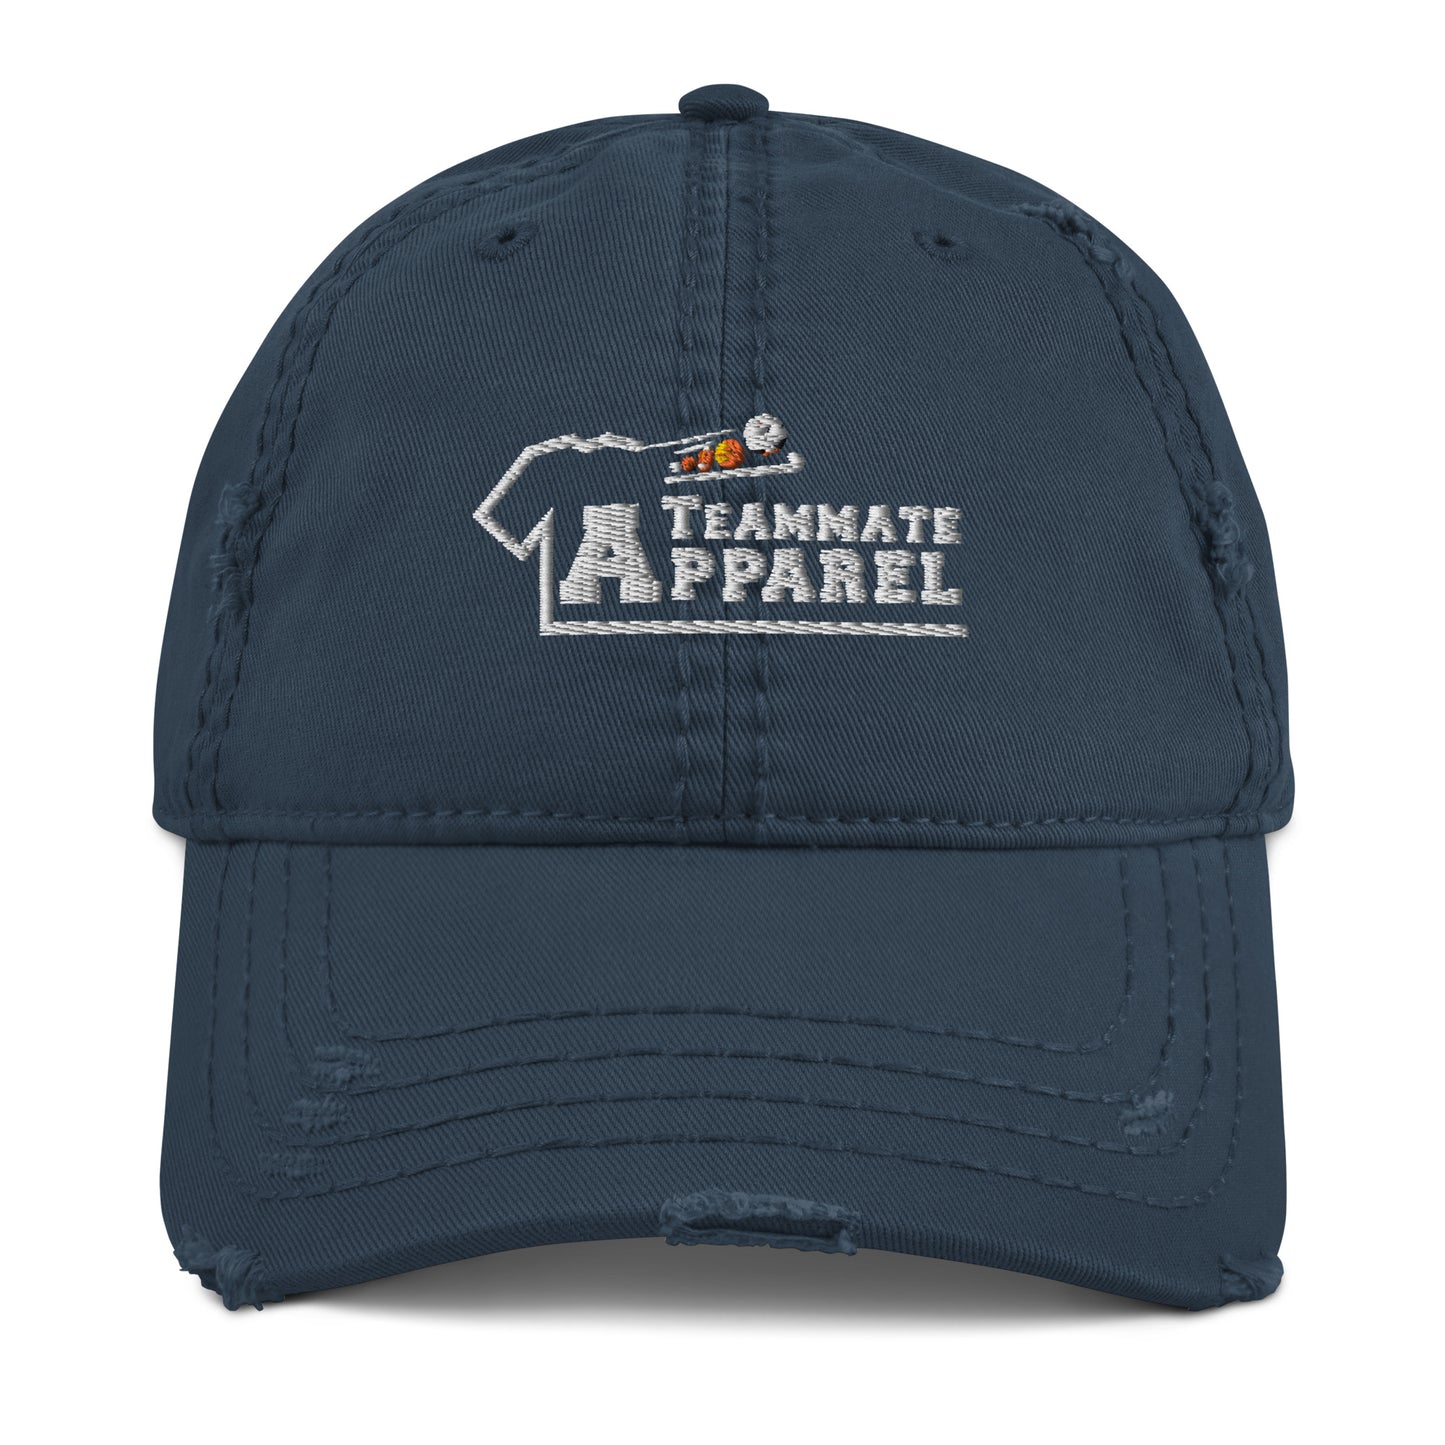 Teammate Apparel Embroidery Distressed Dad Hat